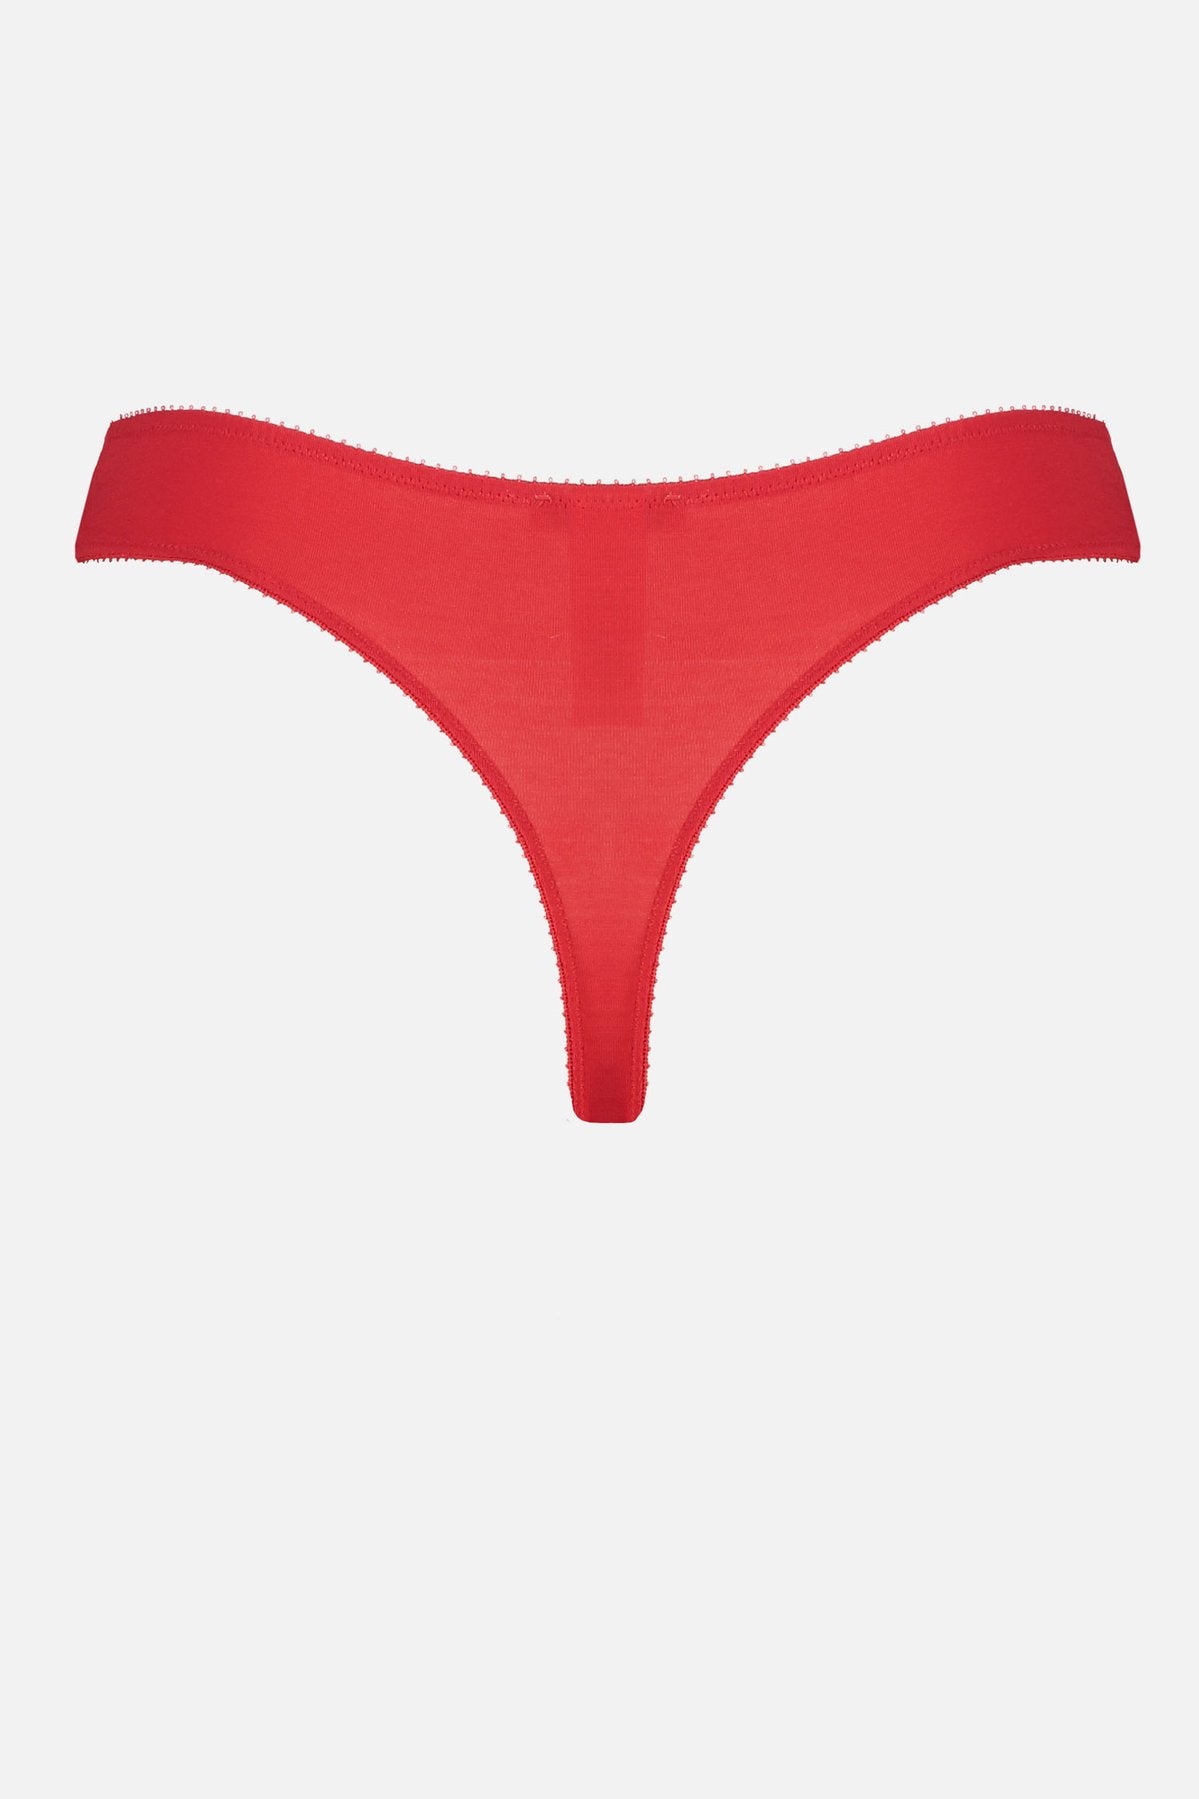 Whitney Thong - Bold - Red